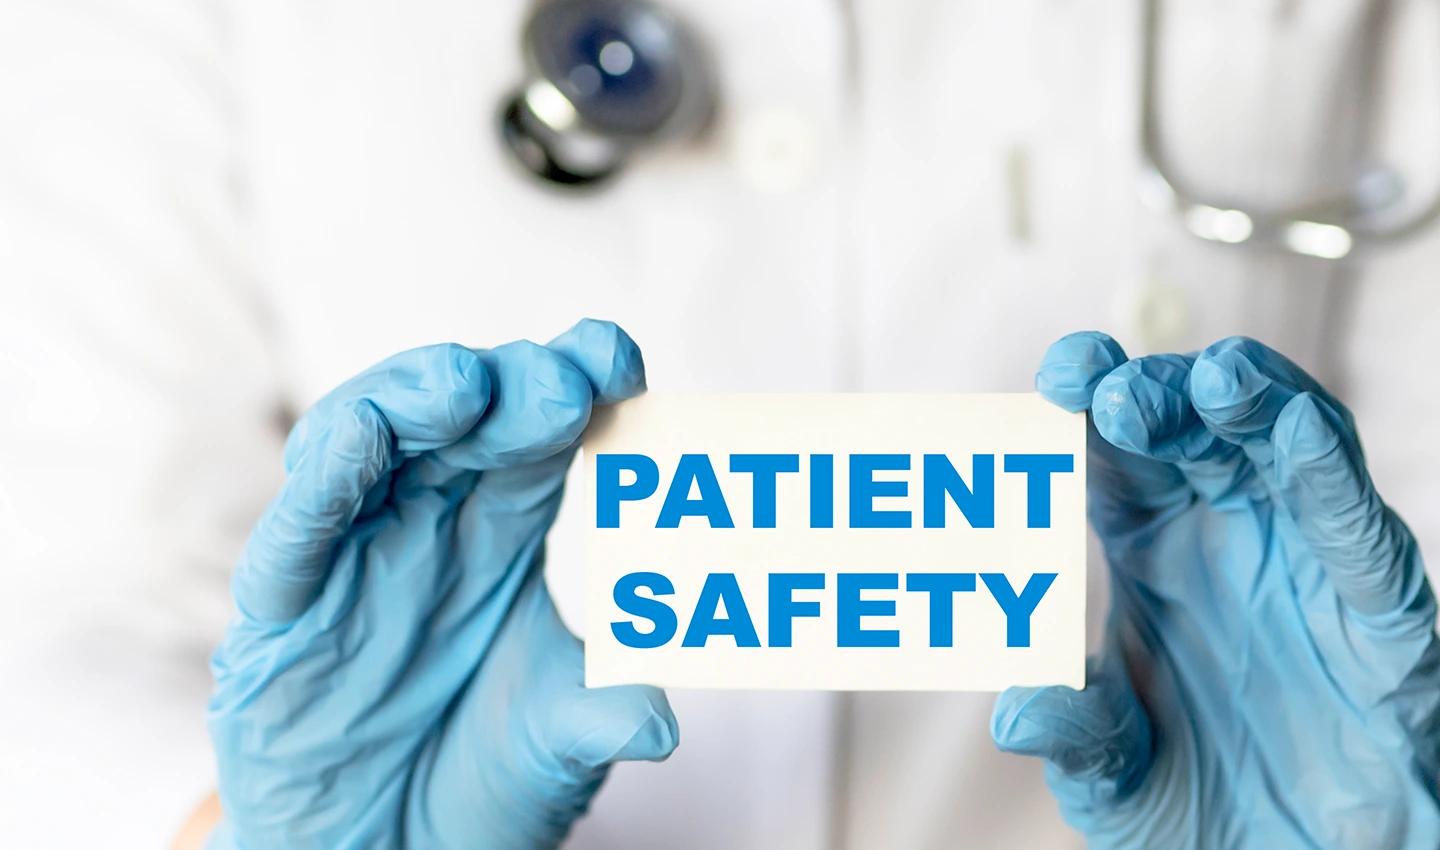 Facelift surgeon holding paper with 'Patient Safety' written on it, illustrating the importance of patient safety in facelift regulations.